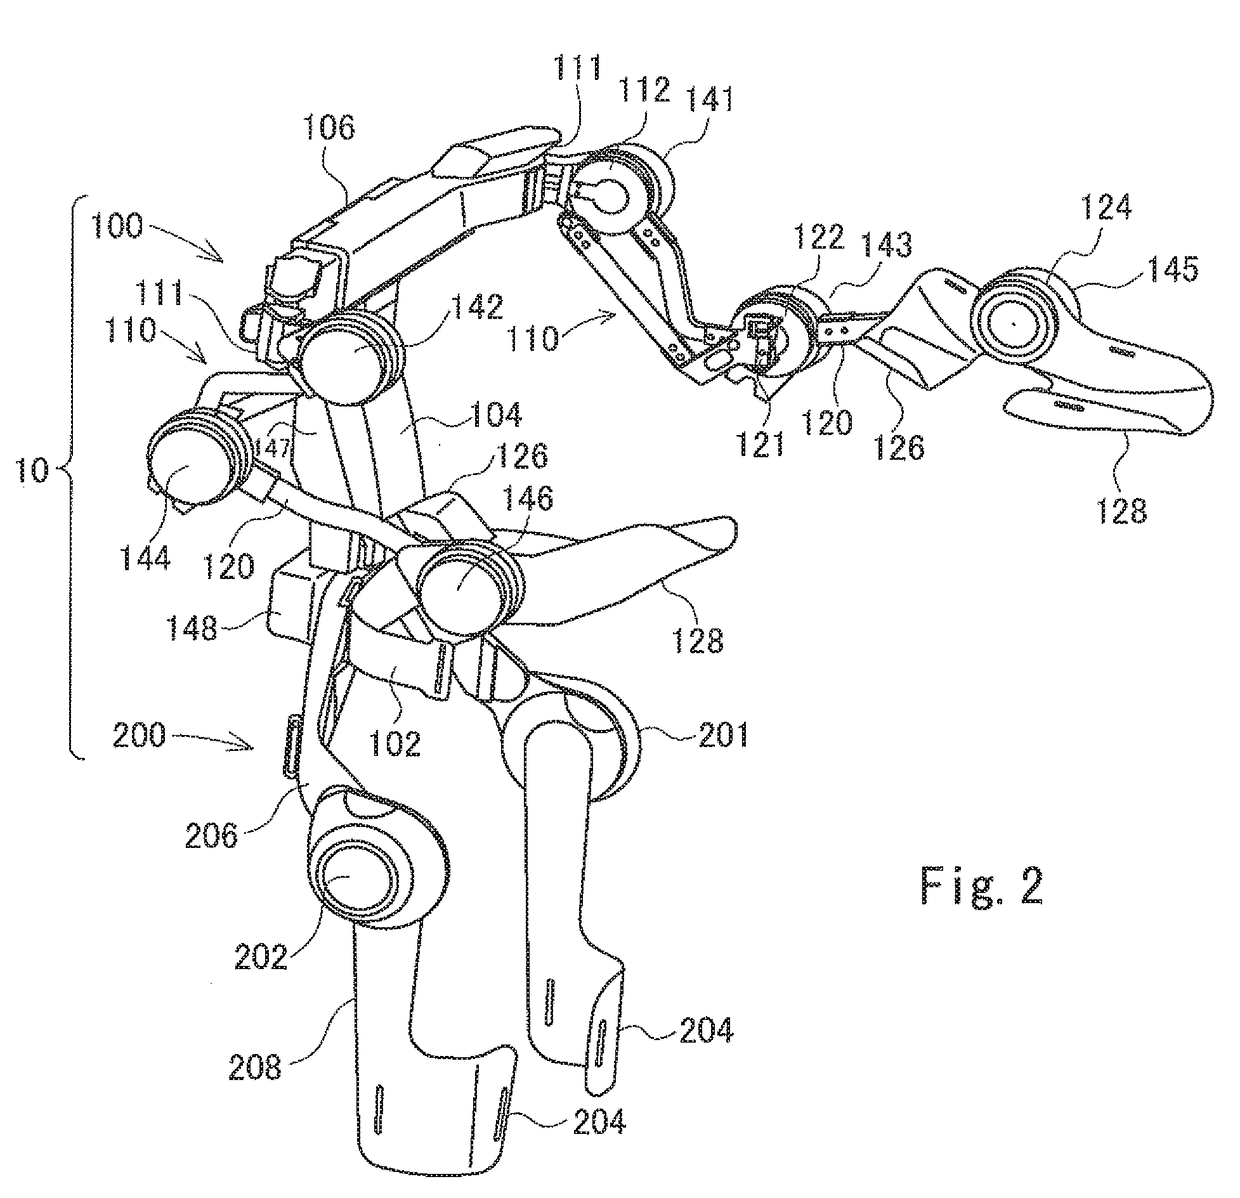 Wearing-type movement assistance device